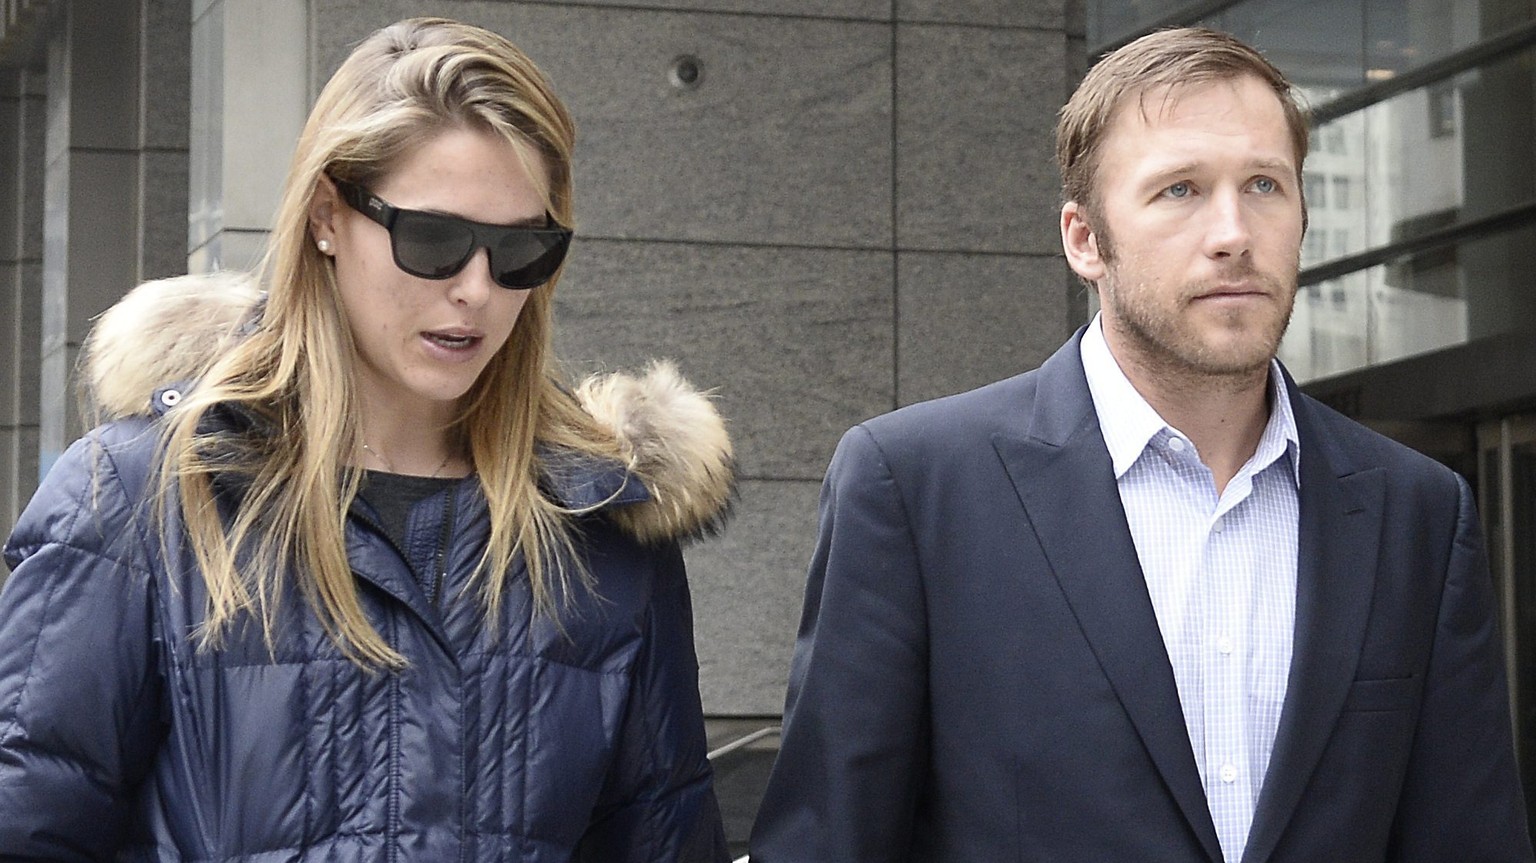 epa04158041 US skier Bode Miller (R) and wife Morgan Beck Miller (L) leave a family court in New York, New York, USA, 07 April 2014. Miller was at court due to a dispute with his ex-girlfriend Sara Mc ...